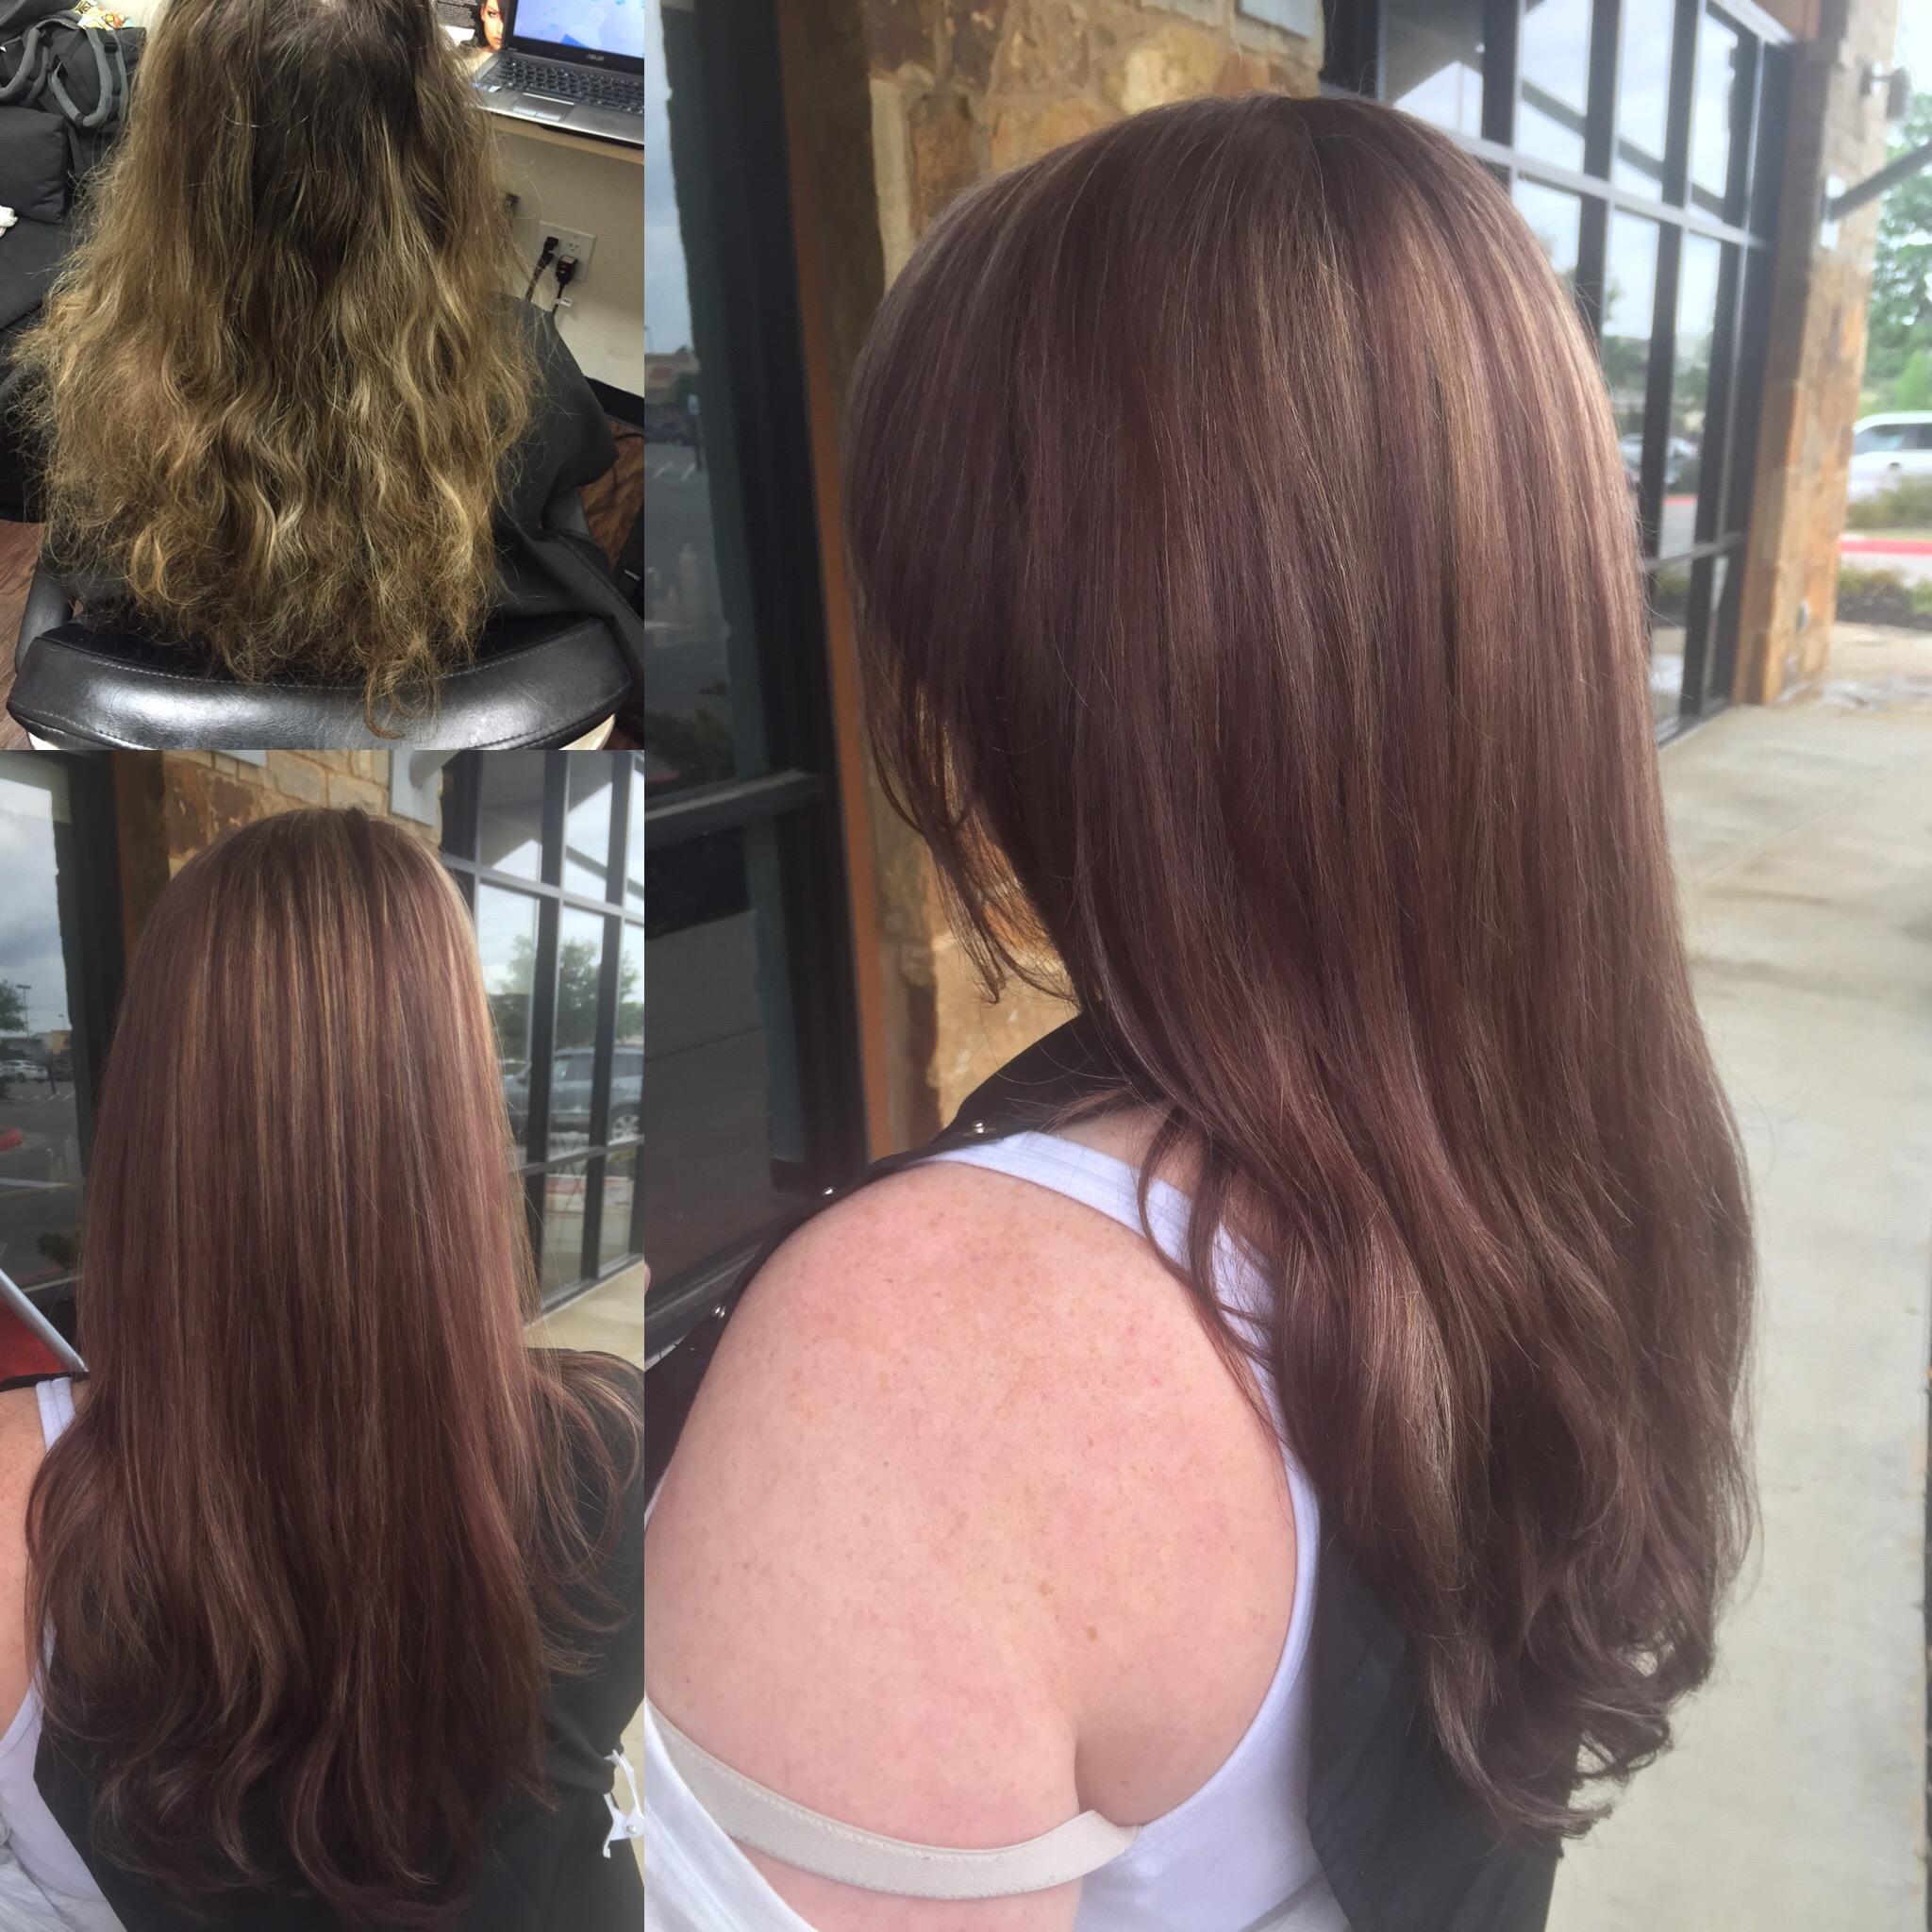 Hairstyles, Hair color, Highlights, Ombre, Bayalage, Wedding Hair, Haircuts,  Updos, Hair extensions, San Antonio Hair Salon. Call and make an  appointment today! 210-994-0165